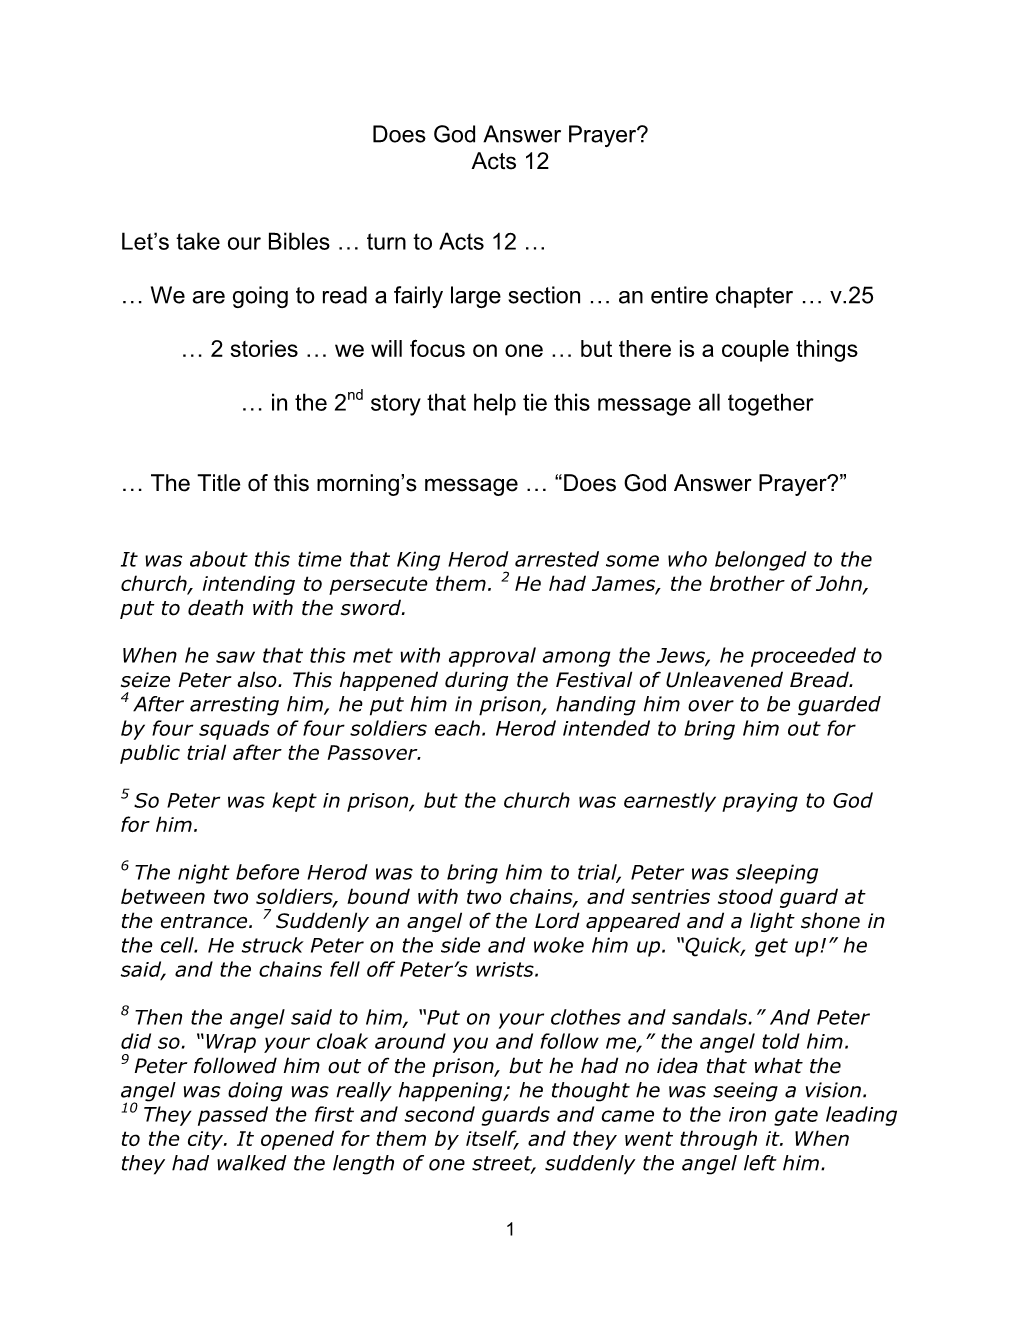 Does God Answer Prayer? Acts 12 Let's Take Our Bibles … Turn to Acts